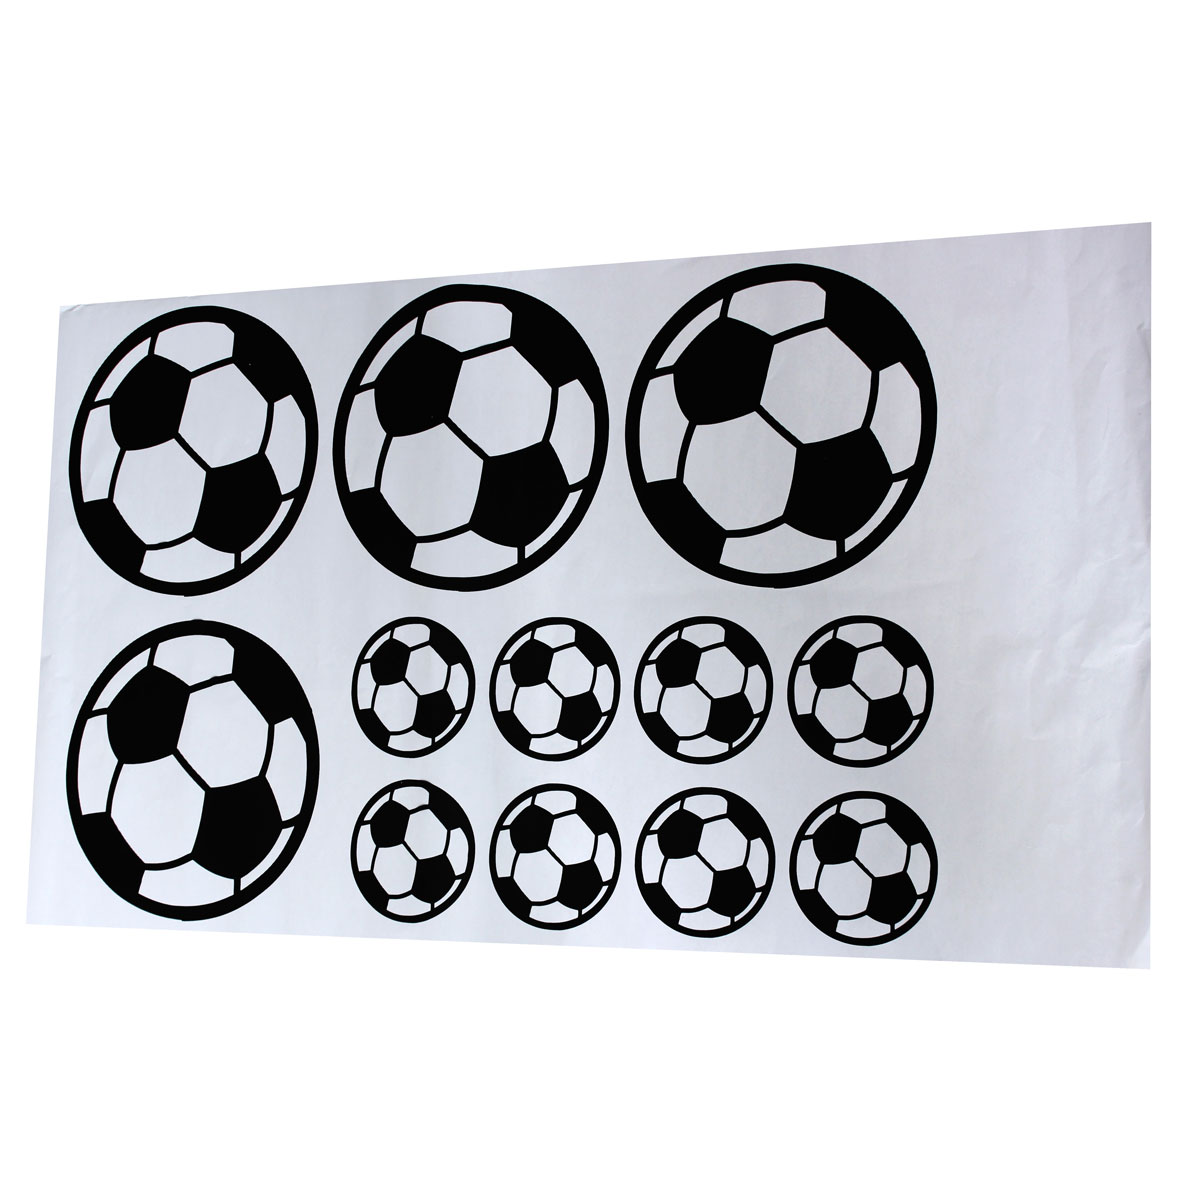 12PcsSet-Football-Soccer-Wall-Stickers-Children-Nursery-Kids-Room-Decals-Gift-Home-Decorations-1470248